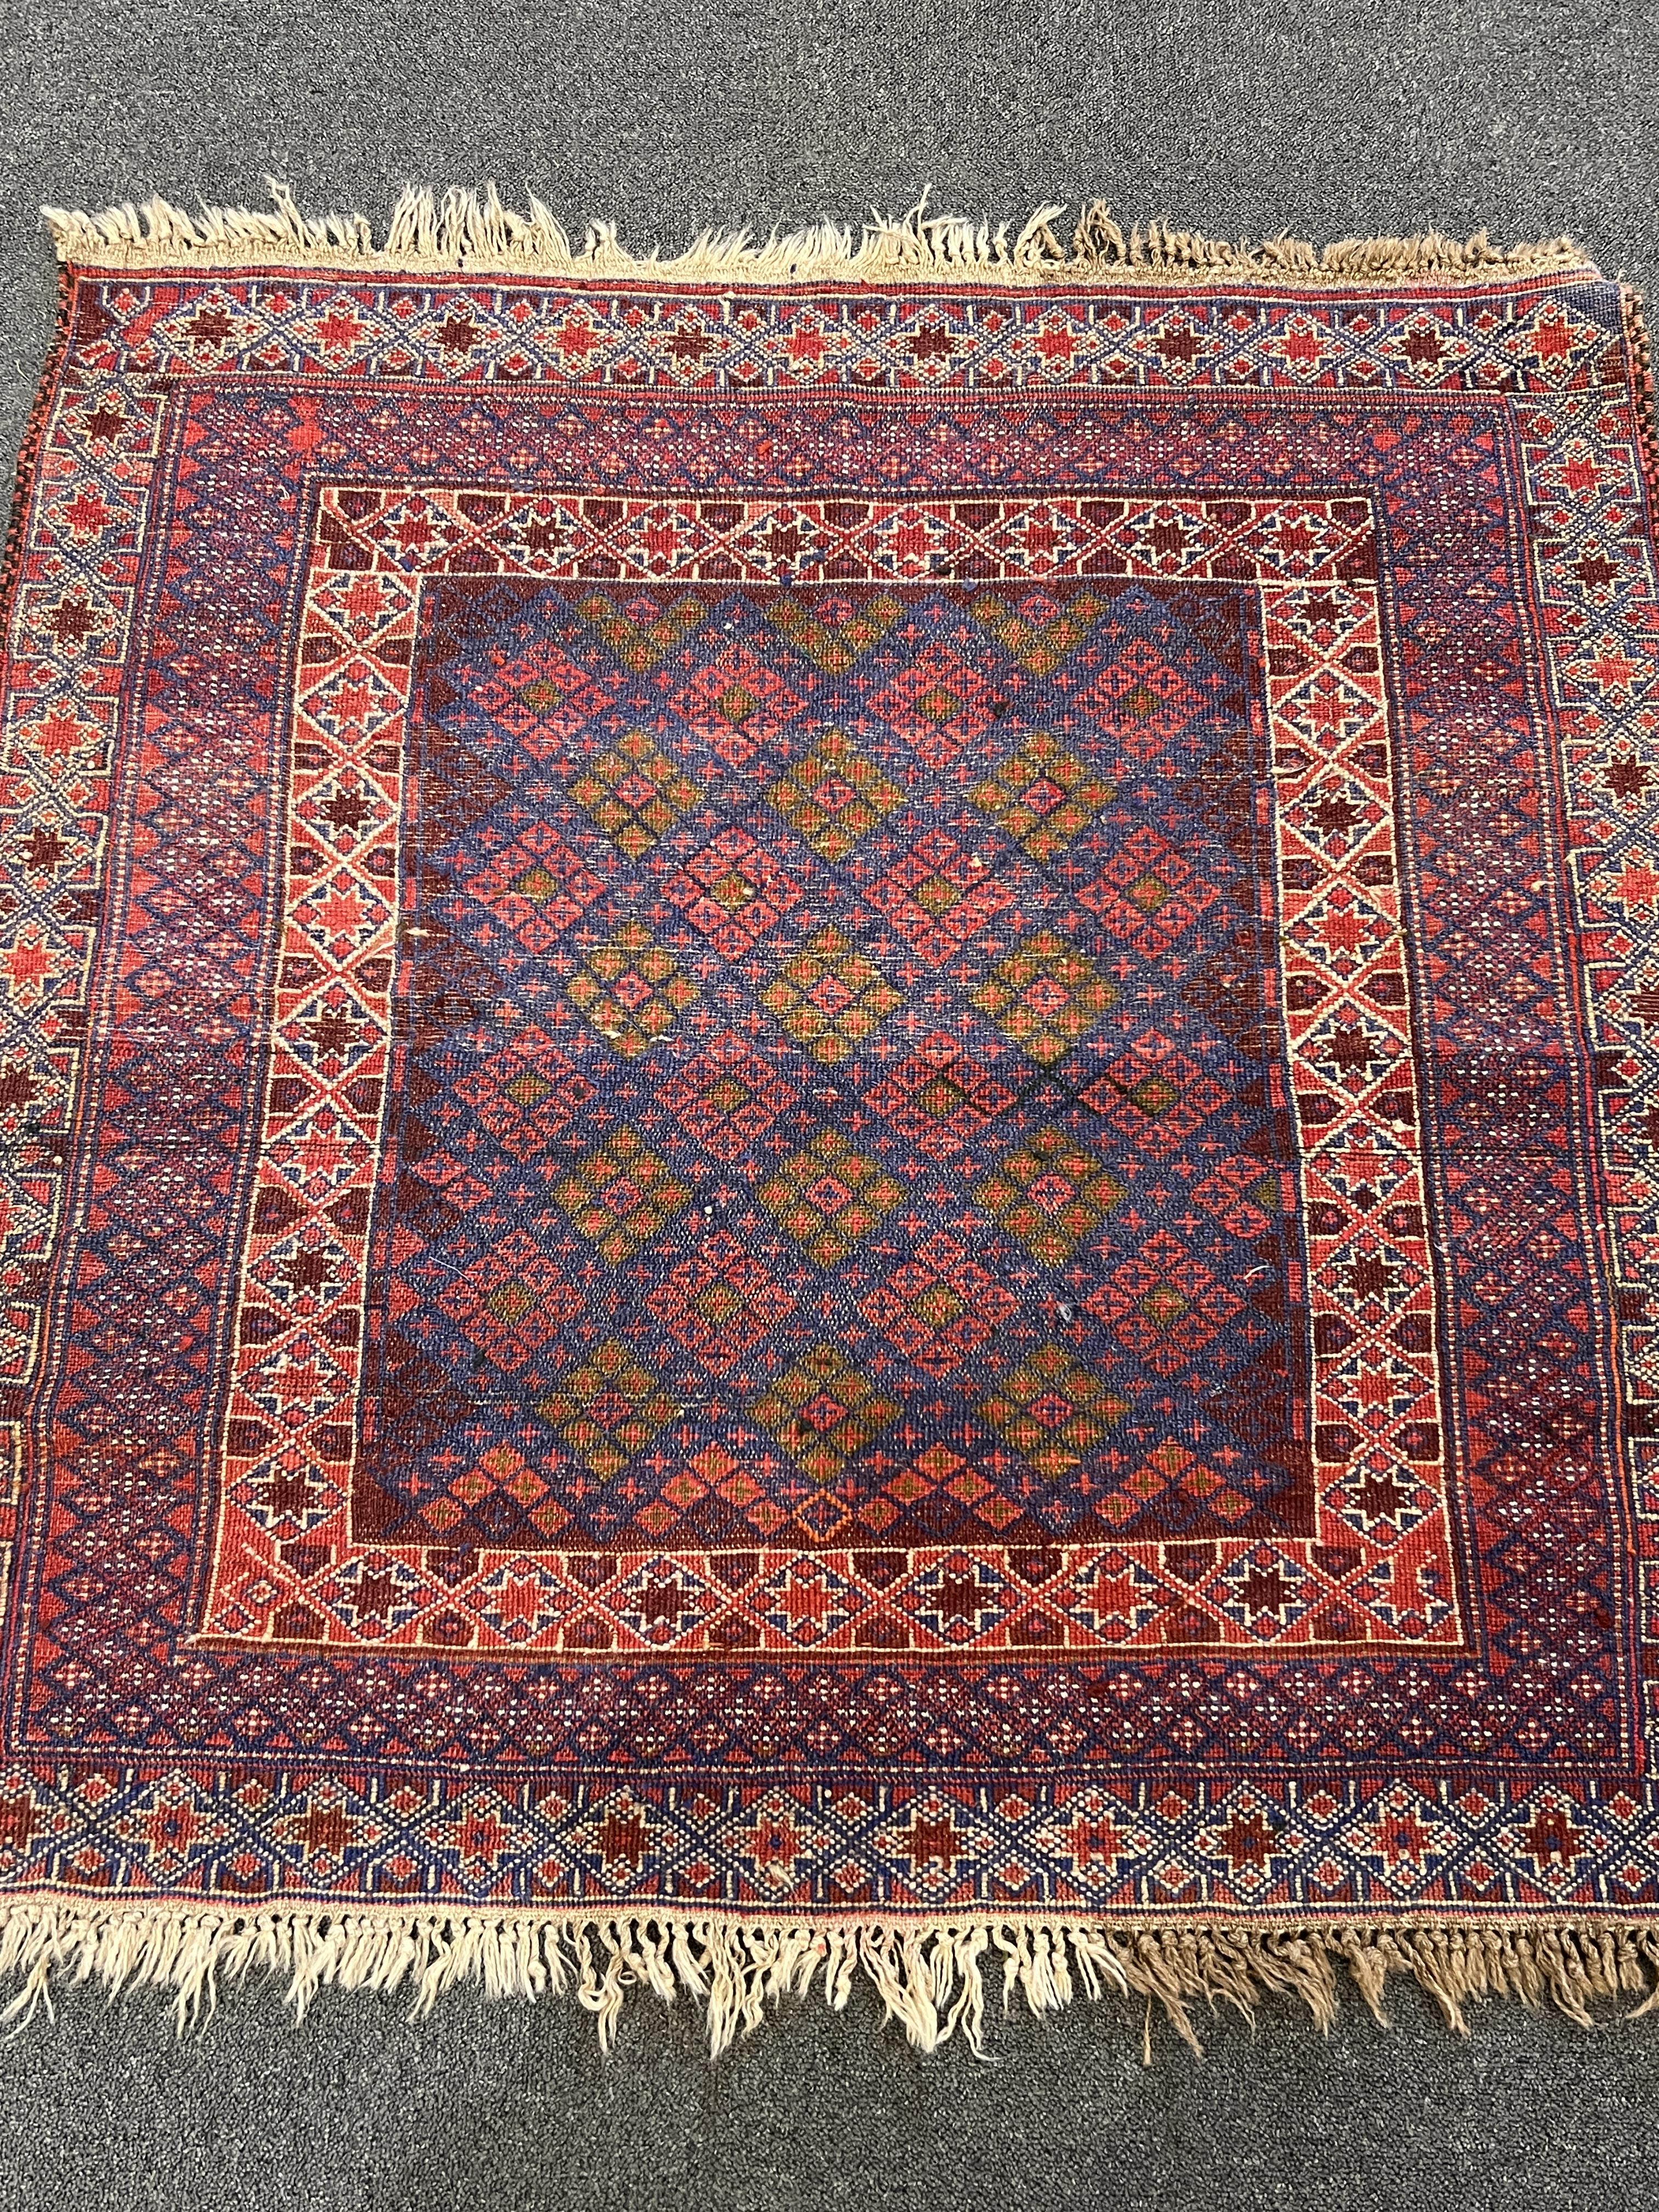 Two Afghan rugs / saddlebags, larger 104 x 108cm. Condition - fair